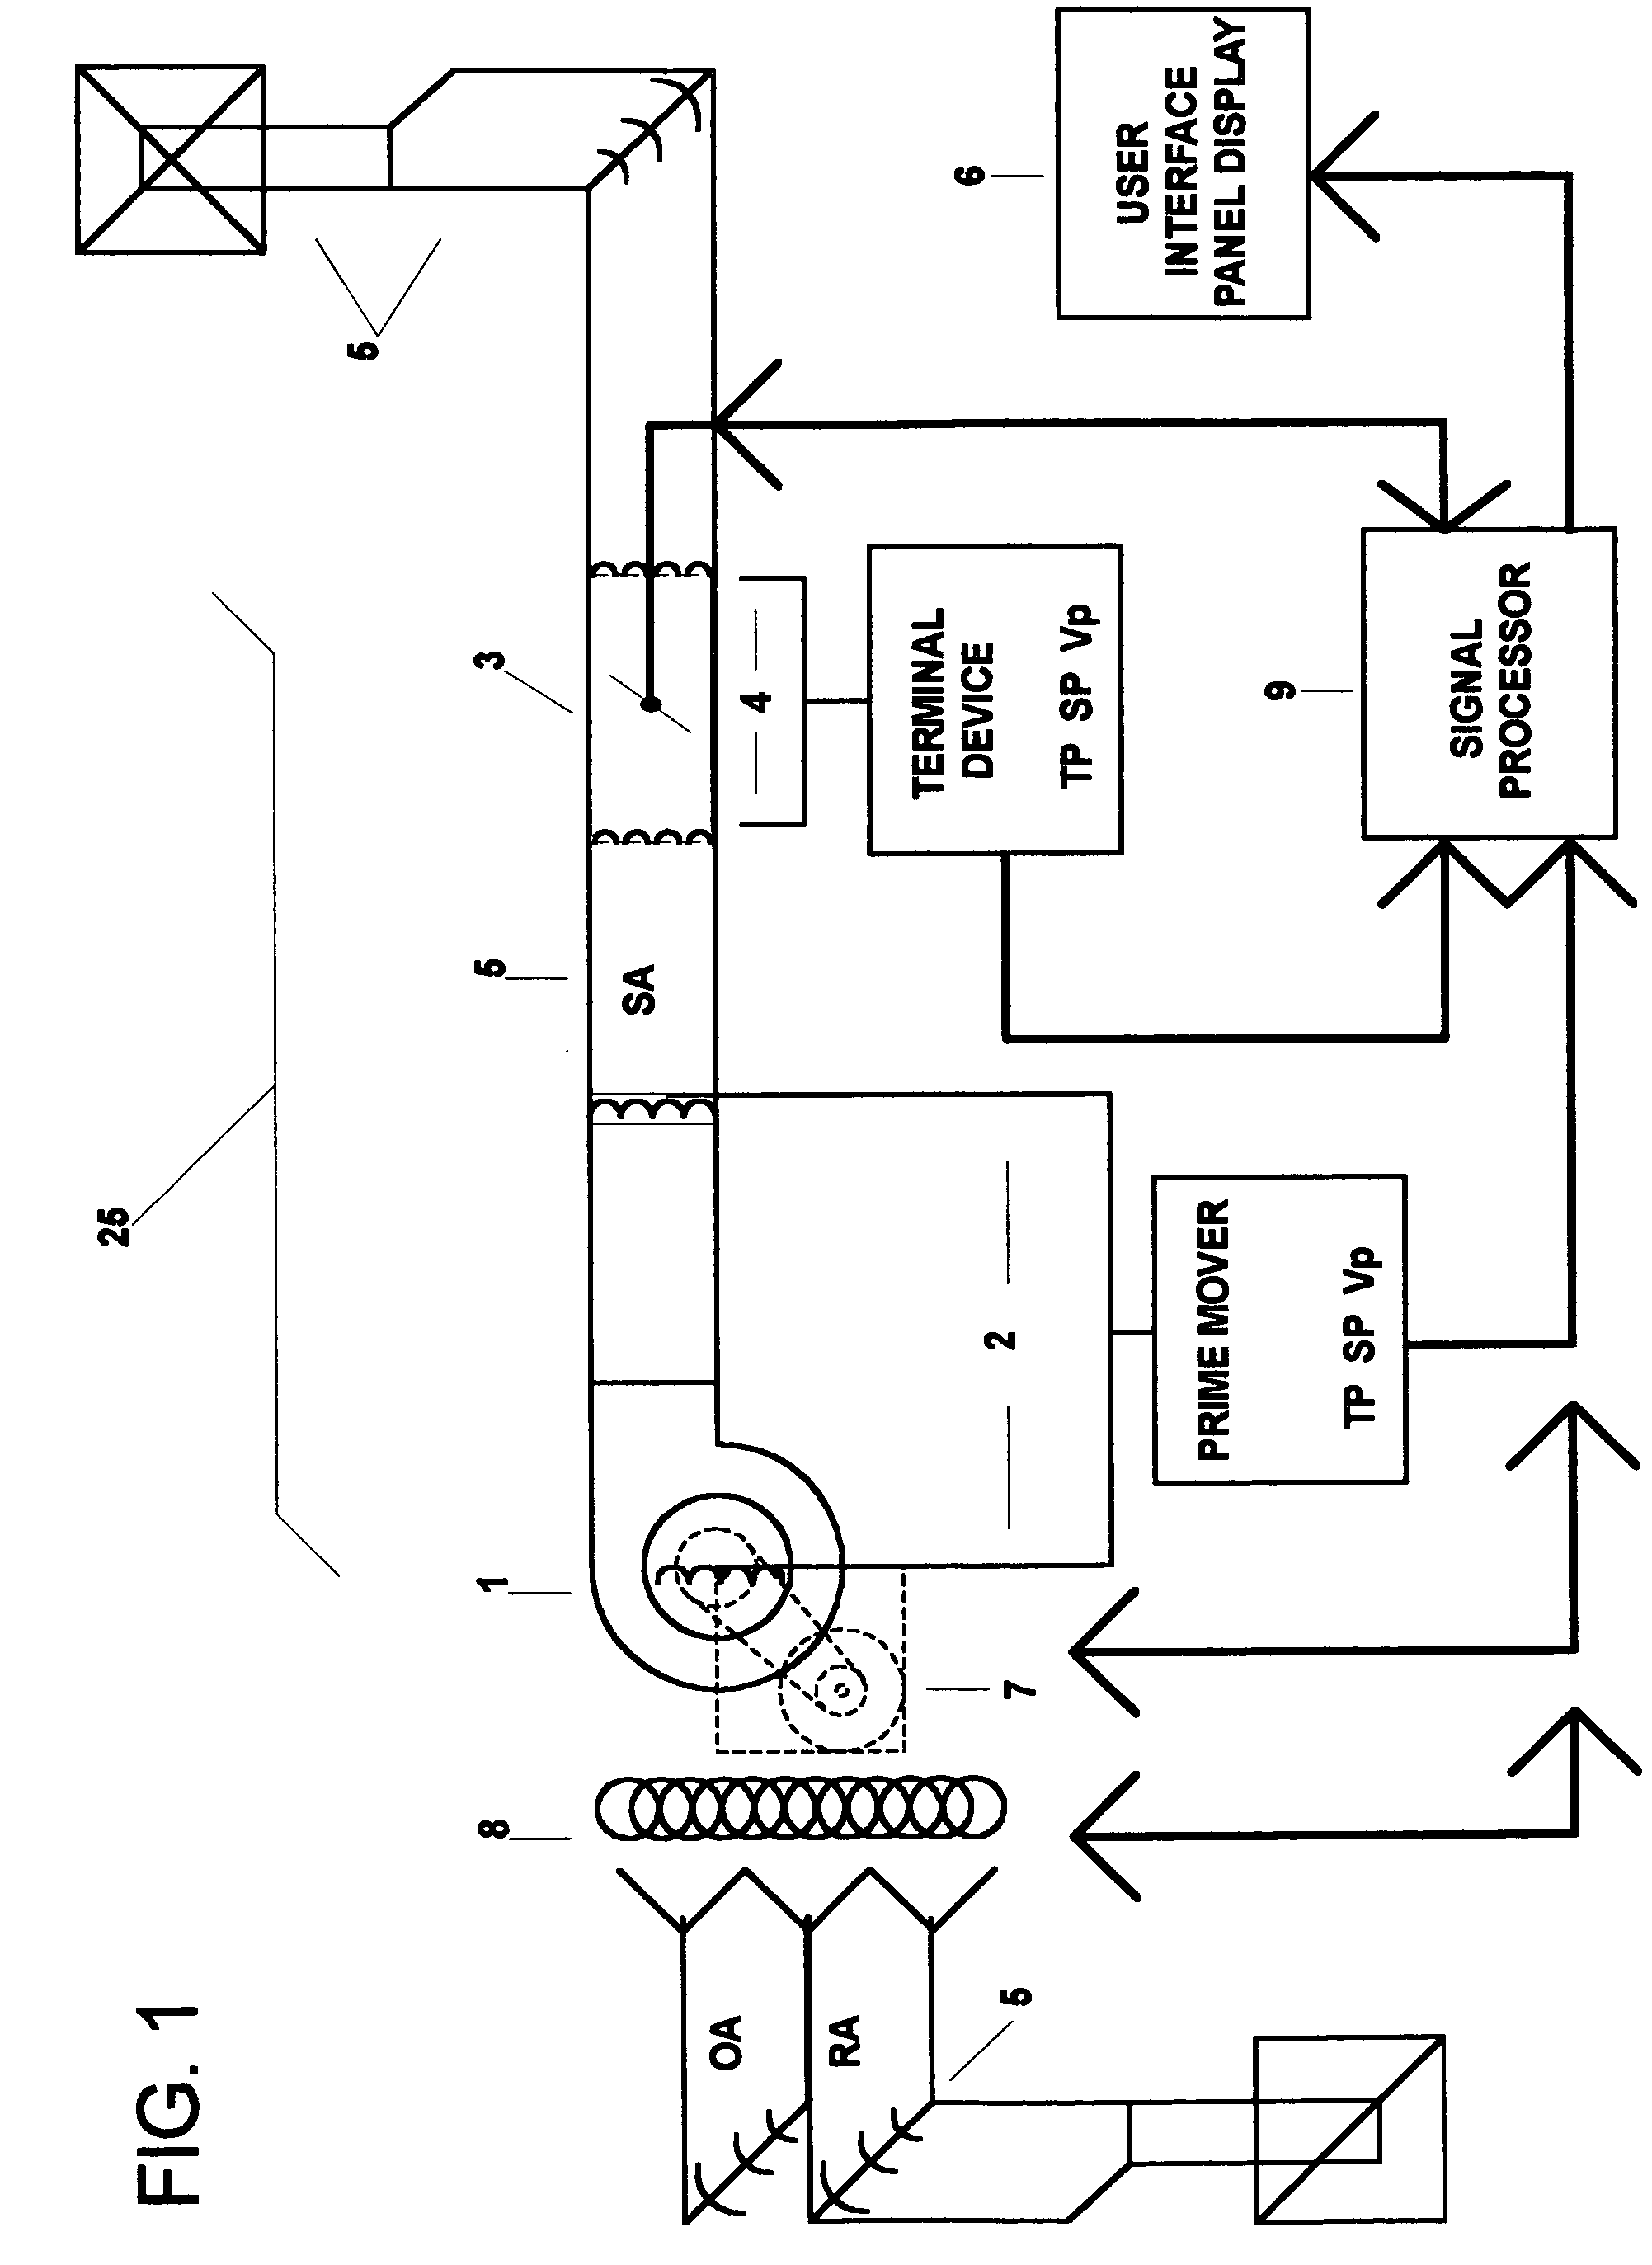 Fully articulated and comprehensive air and fluid distribution, metering, and control method and apparatus for primary movers, heat exchangers, and terminal flow devices